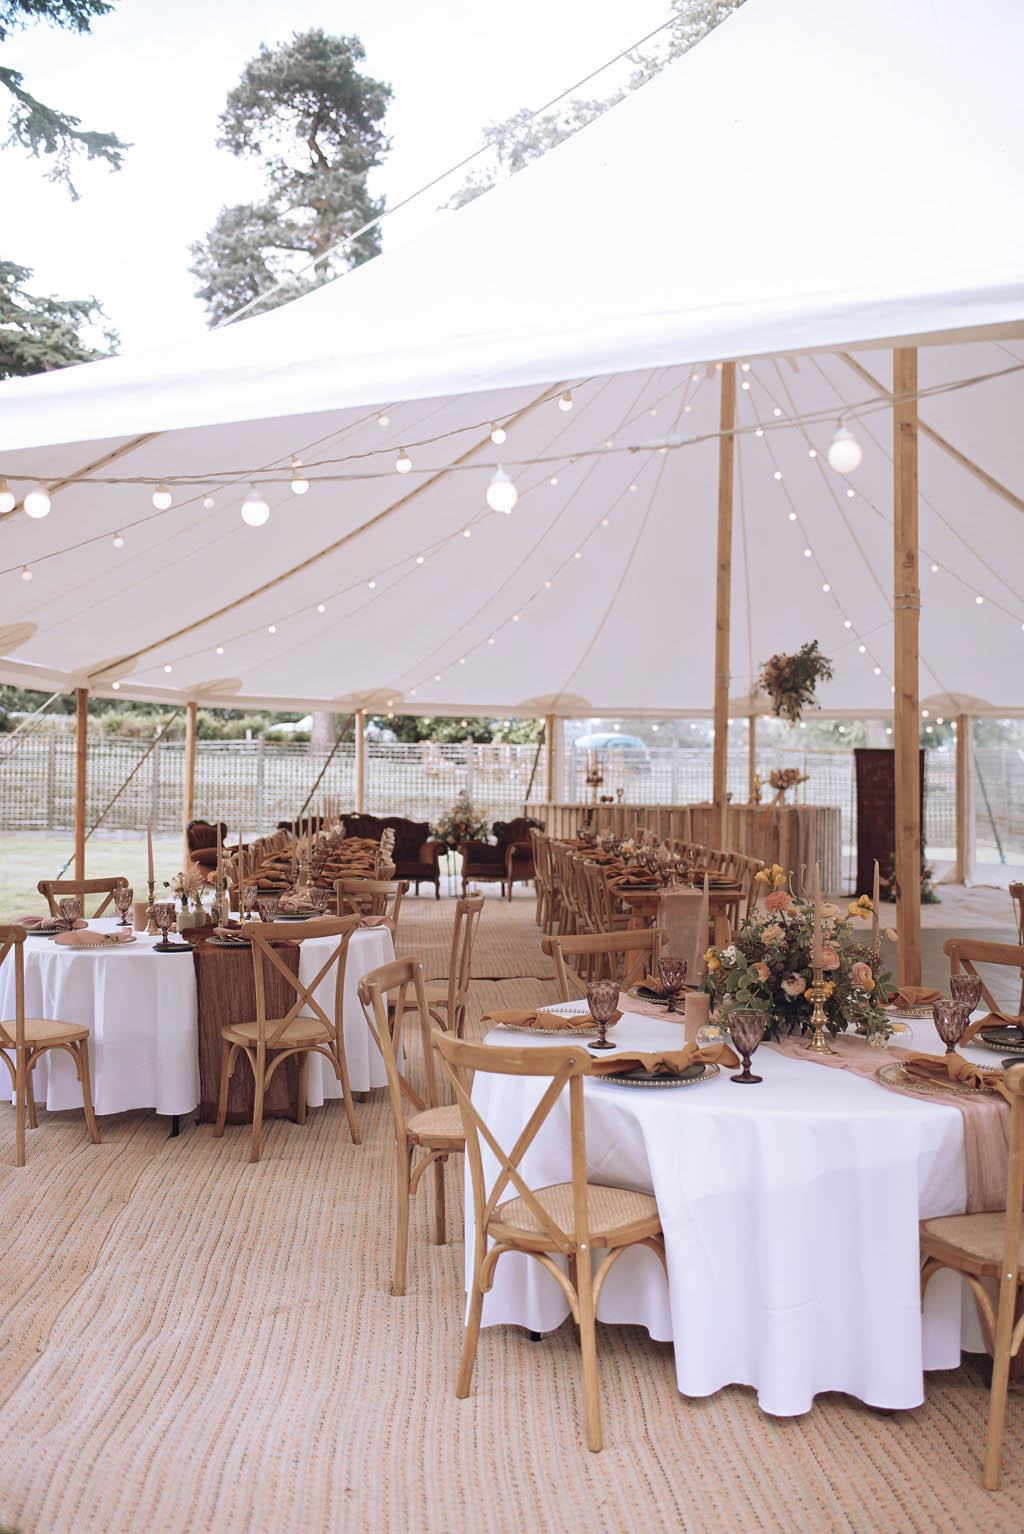 Marquee setup inside with festoon lights by Kelly Hiscox Photography